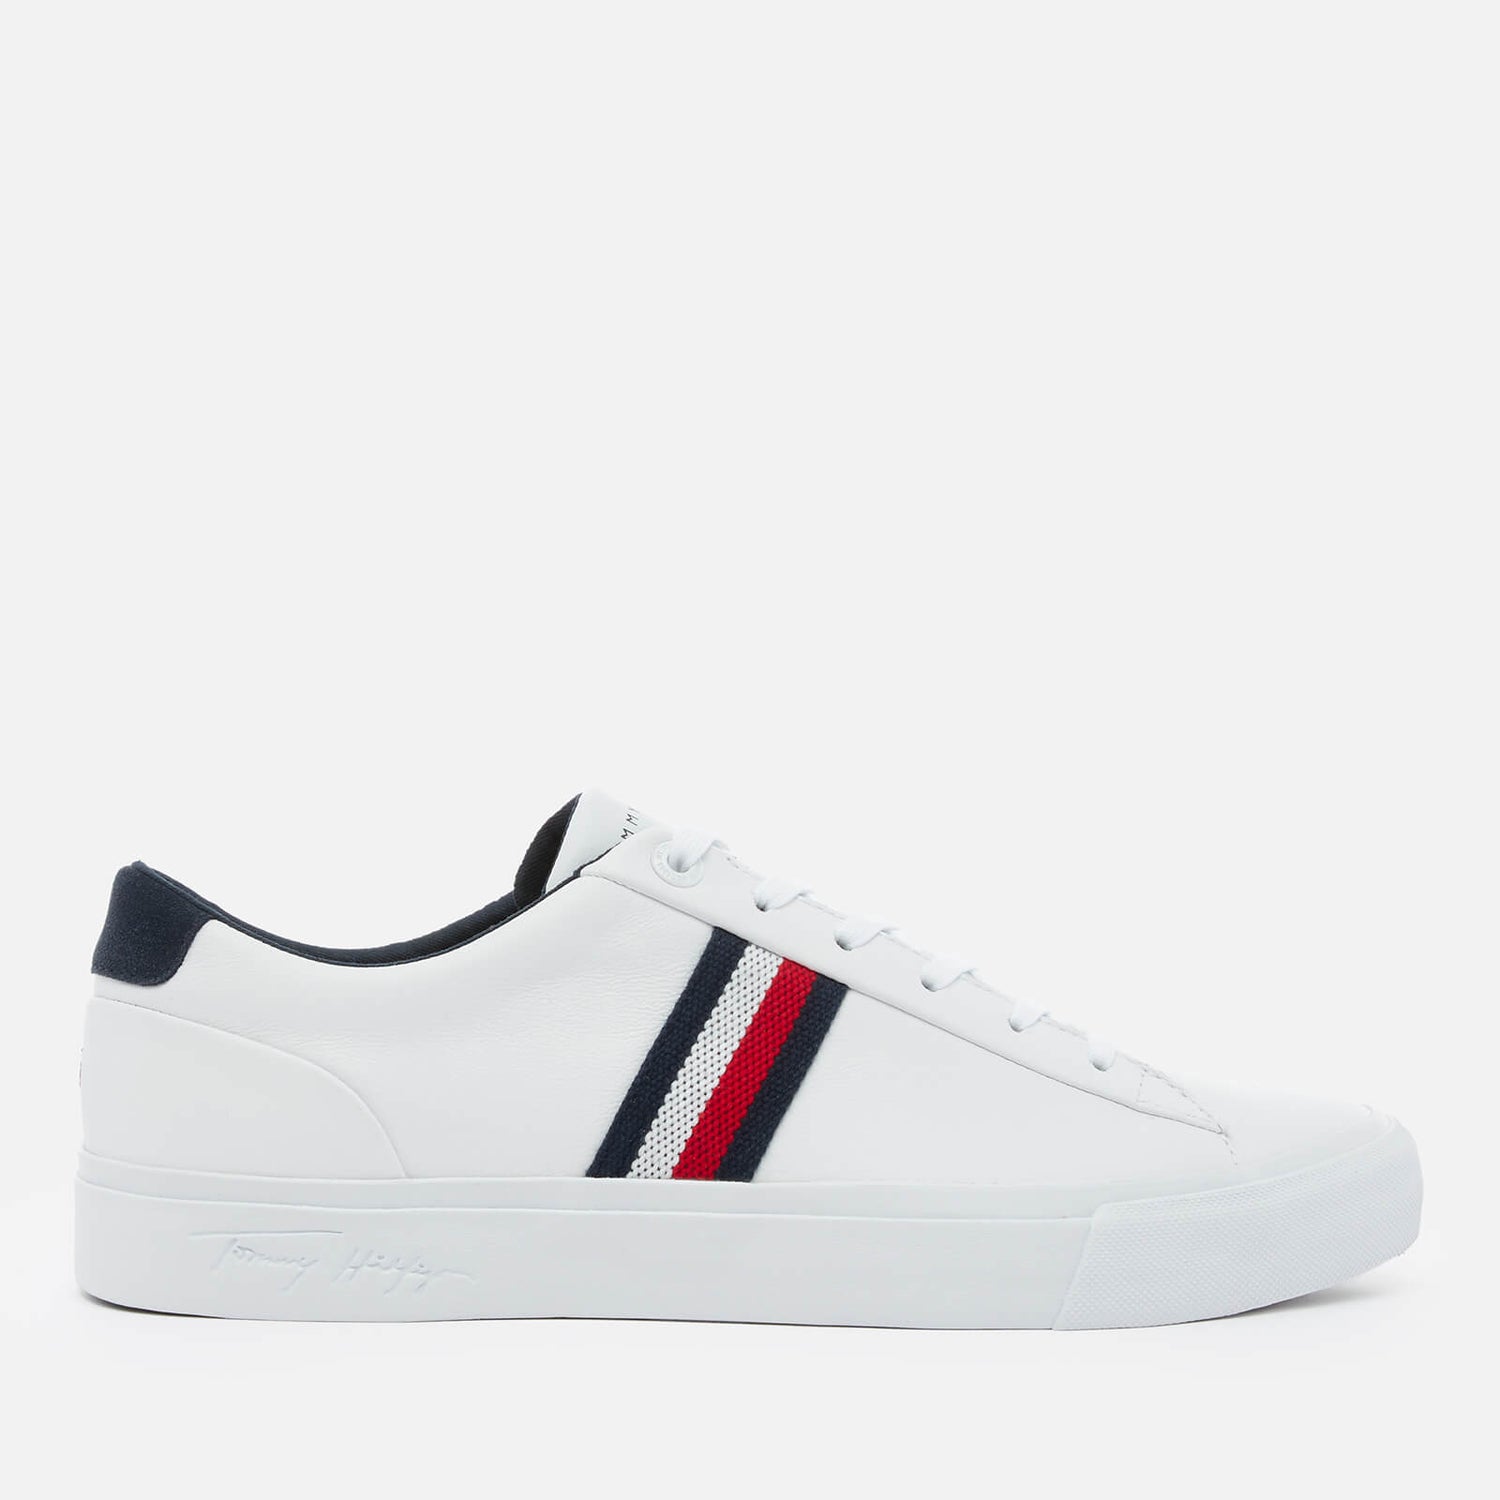 Tommy Hilfiger Men's Corporate Leather Low Top Trainers - White